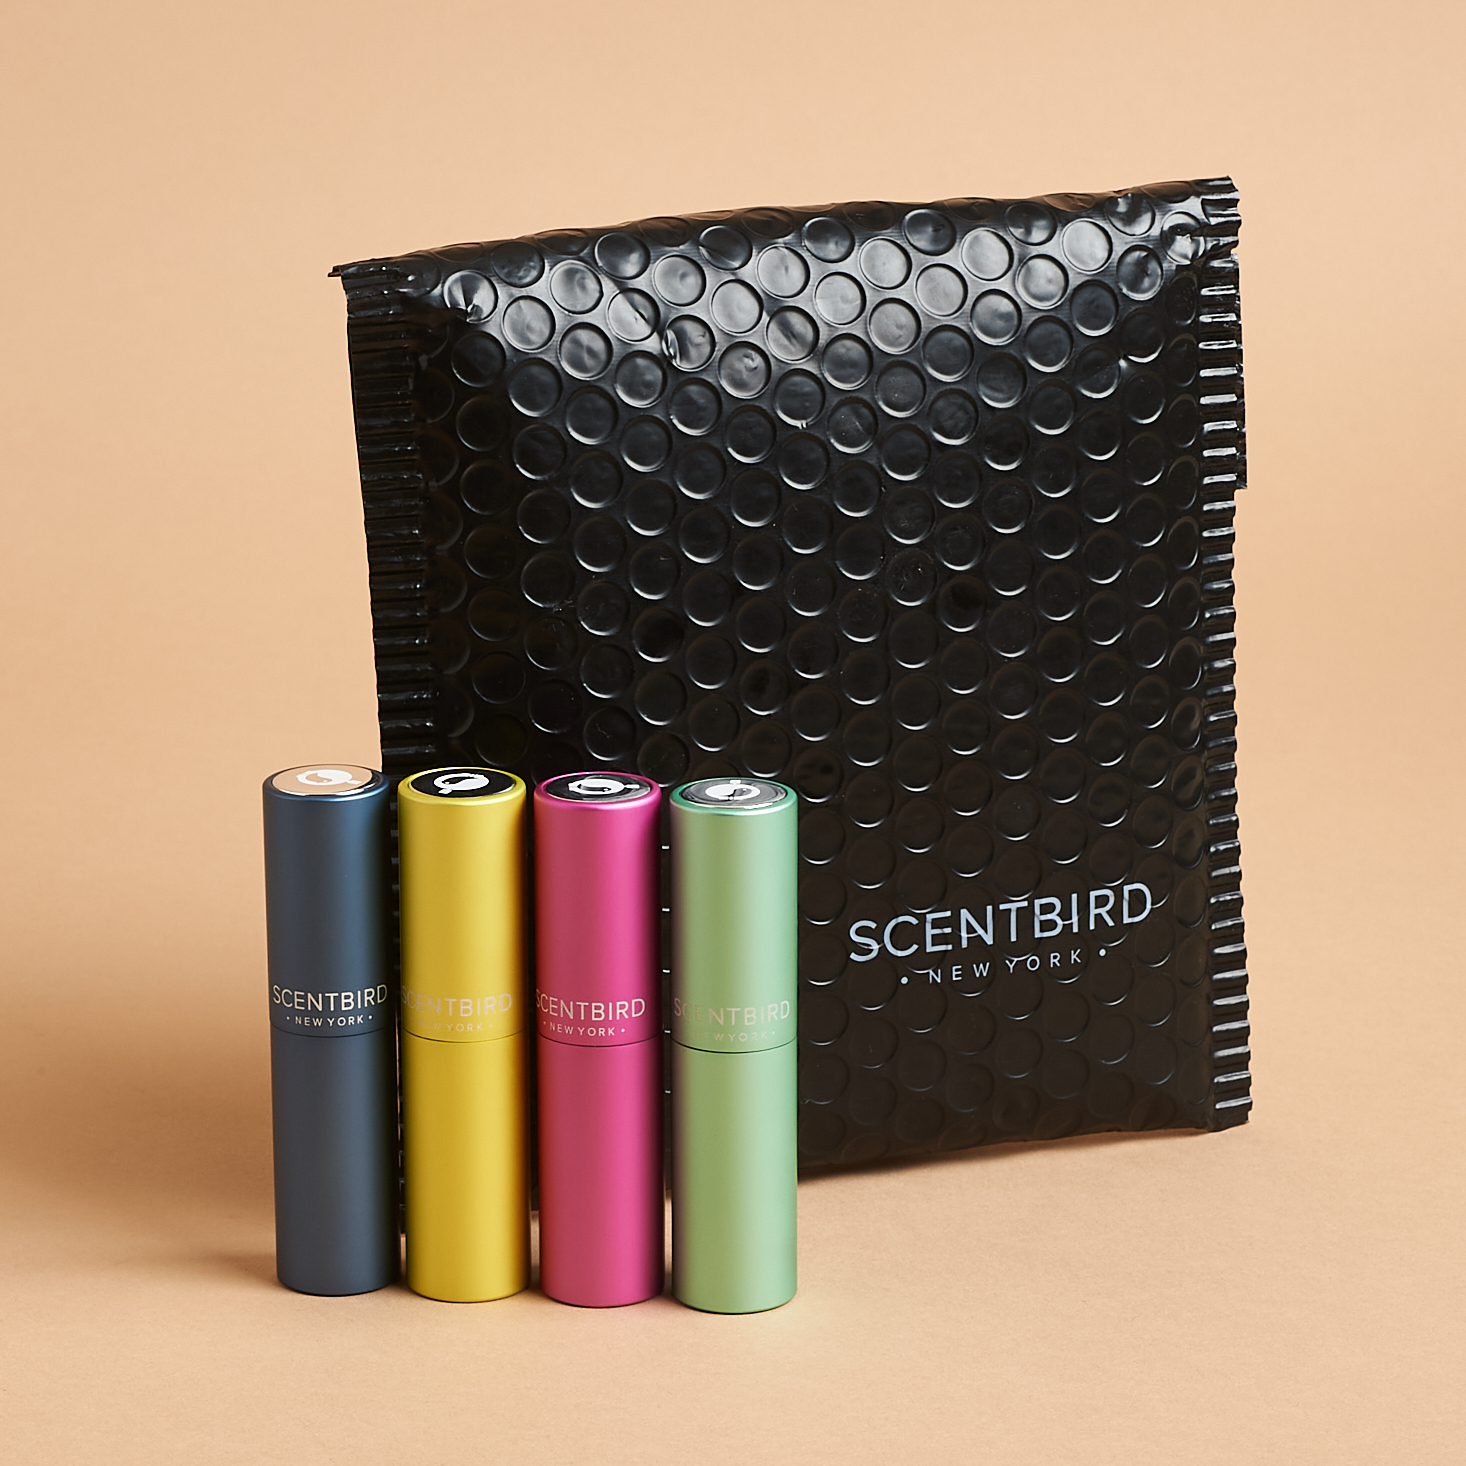 Scentbird has a Black Friday 2021 Deal available now – 50% off your first box